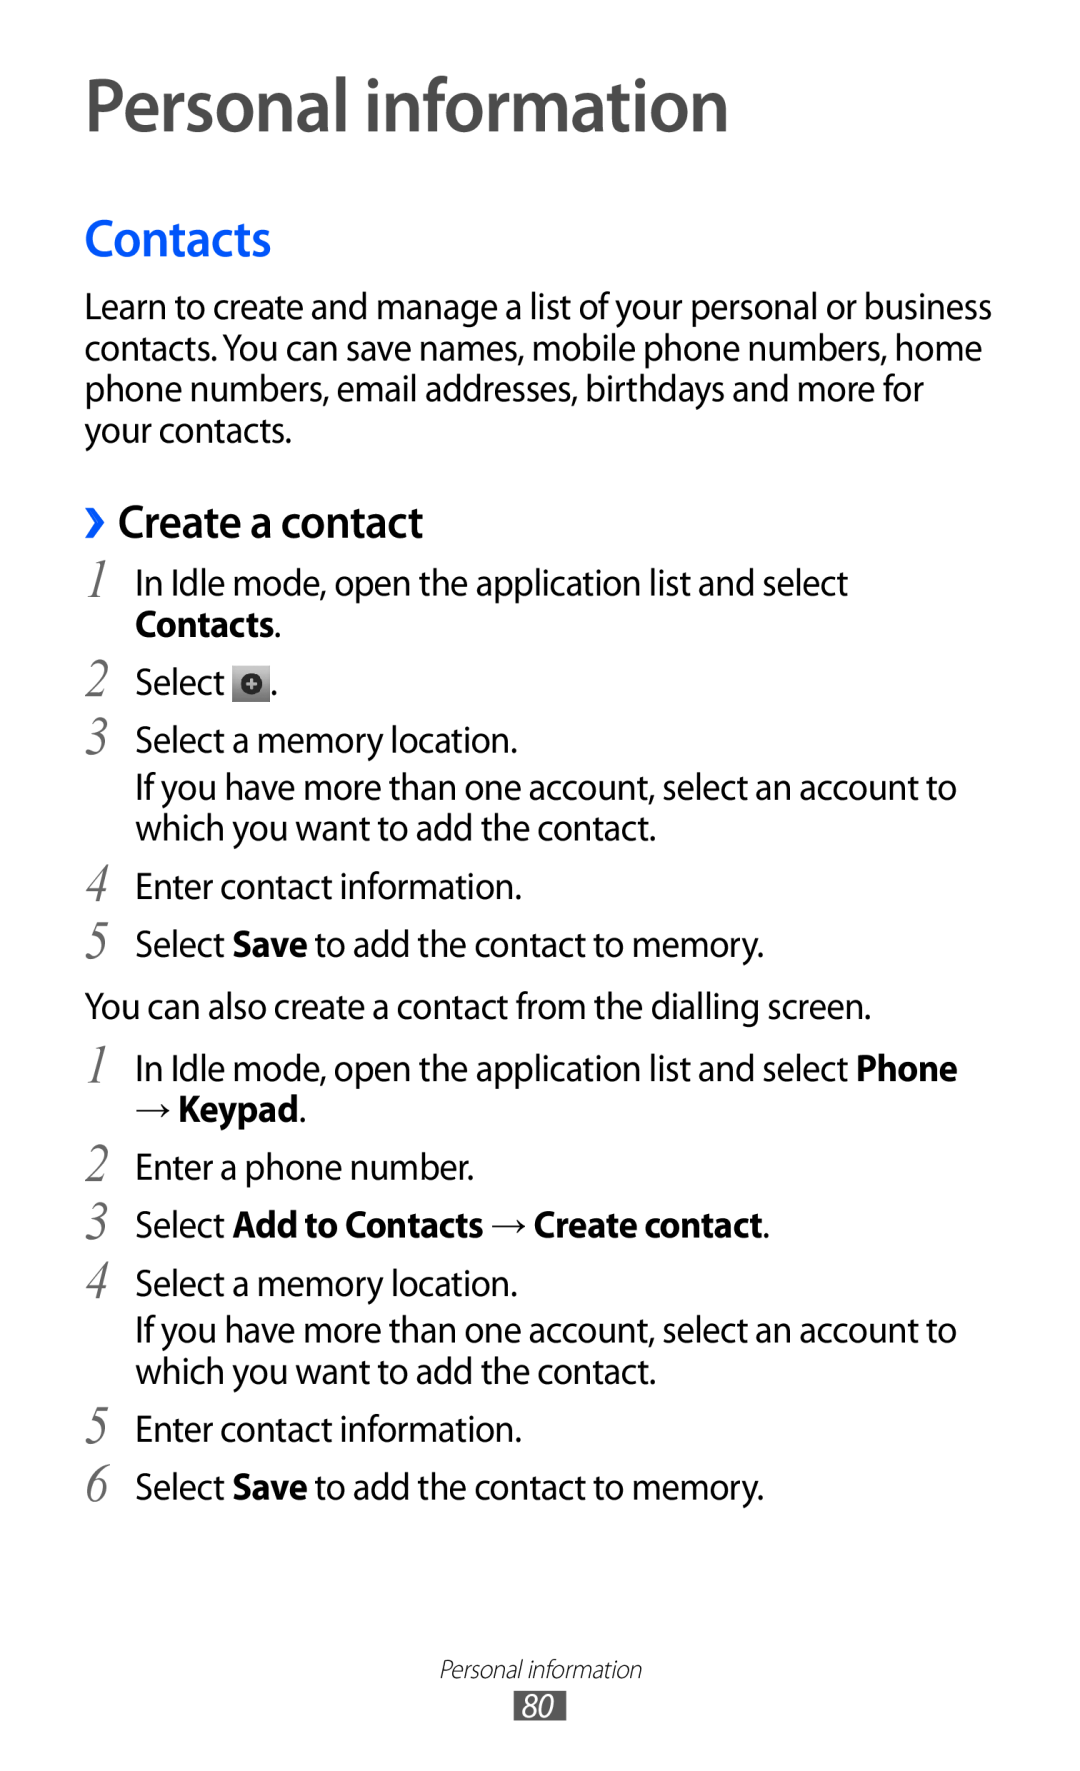 Samsung GT-I9070 Personal information, ››Create a contact, → Keypad, Select Add to Contacts → Create contact 